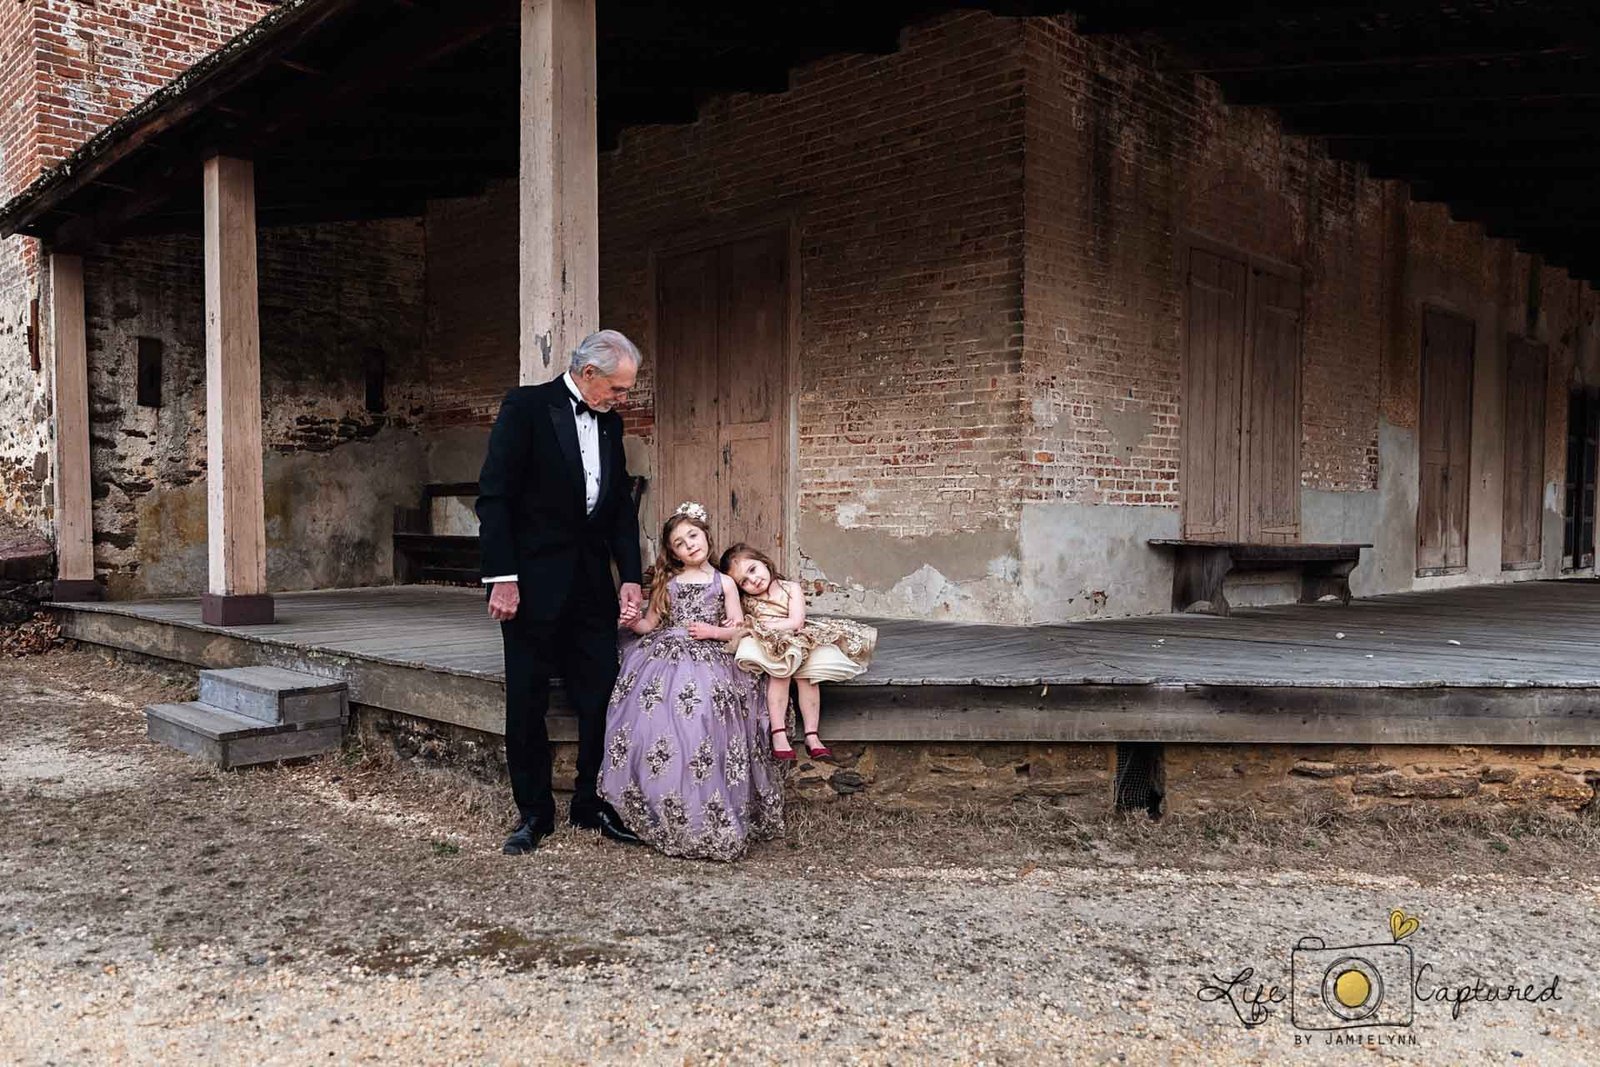 Family portraits of grandpa and granddaughters